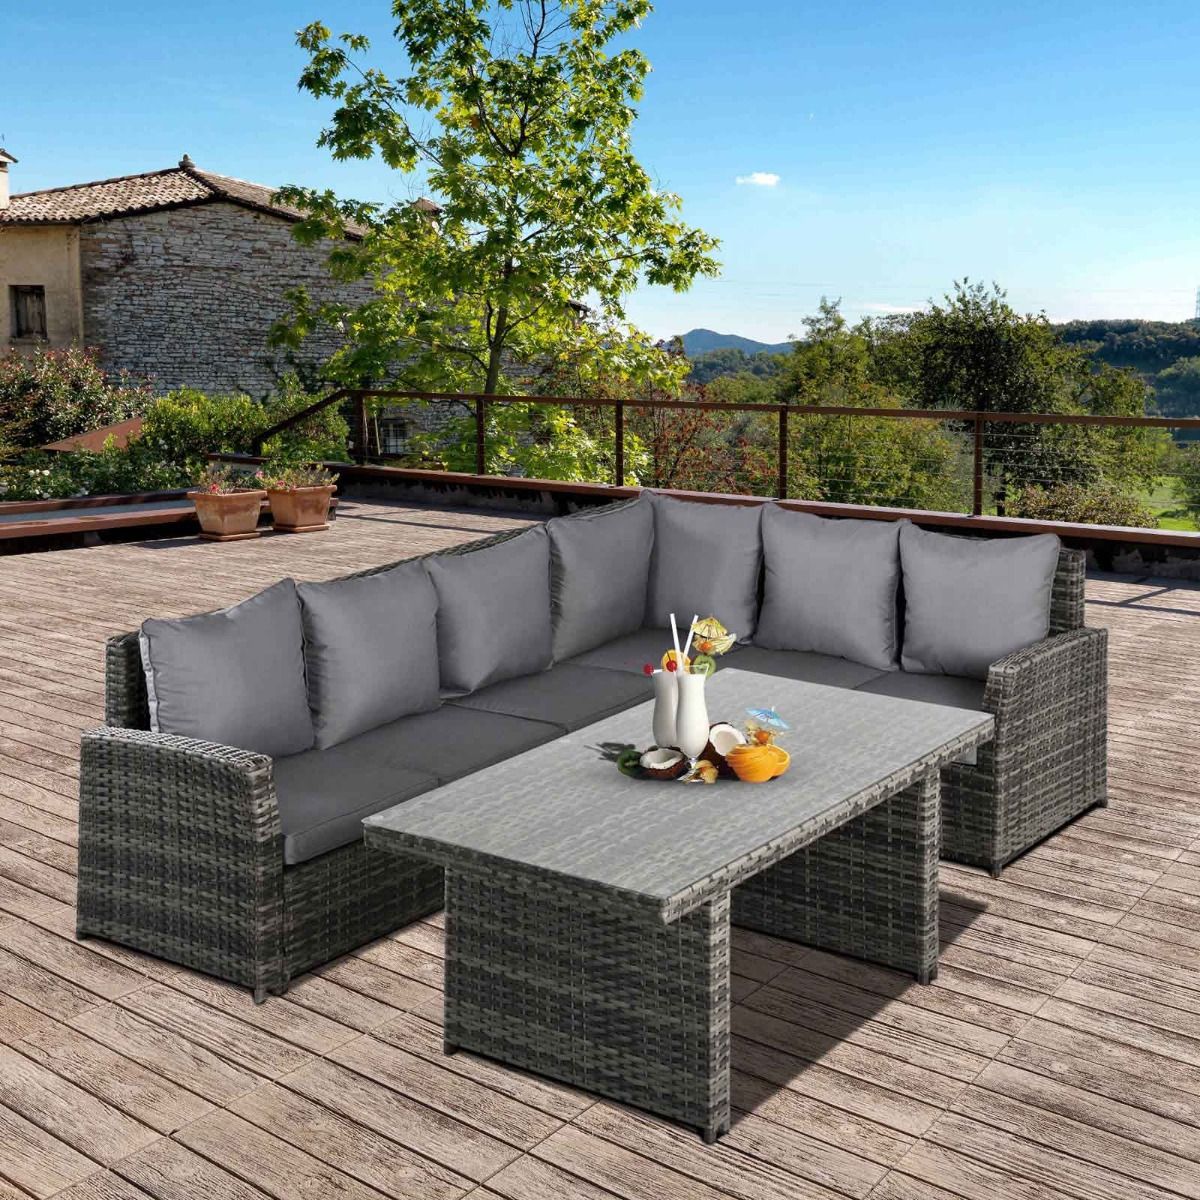 Outsunny Rattan Corner Sofa Dining Set With Tempered Glass Table, Grey - 5 Seater